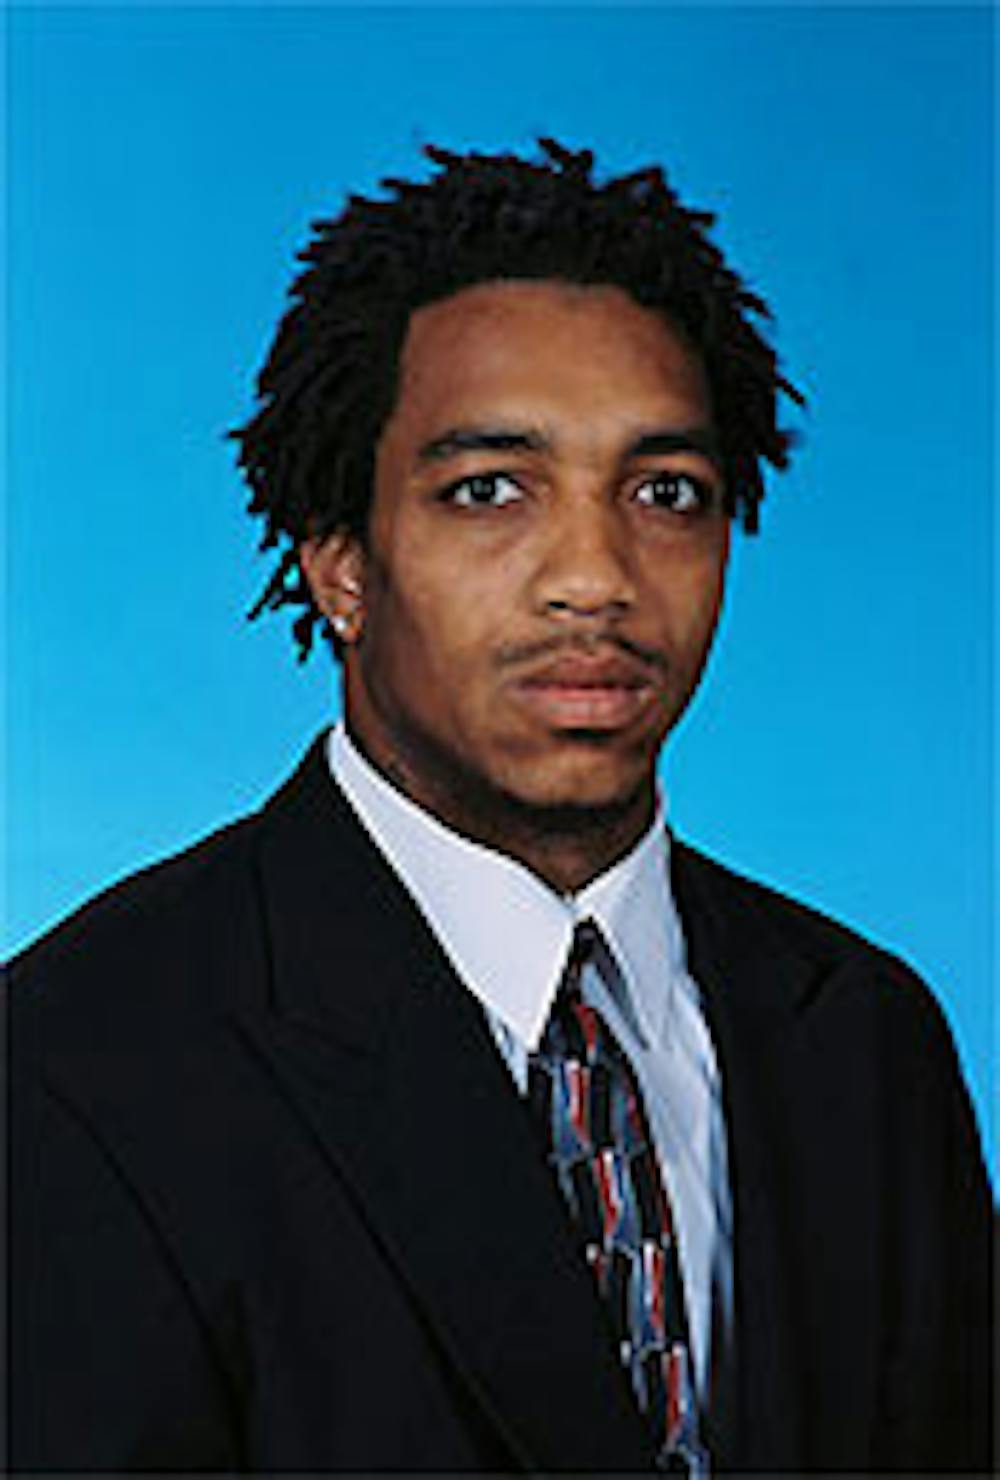 <p>Reche Caldwell, who played wide receiver for UF from 1998-2001, was arrested on May 13 for possession of MDMA with the intent to sell.</p>